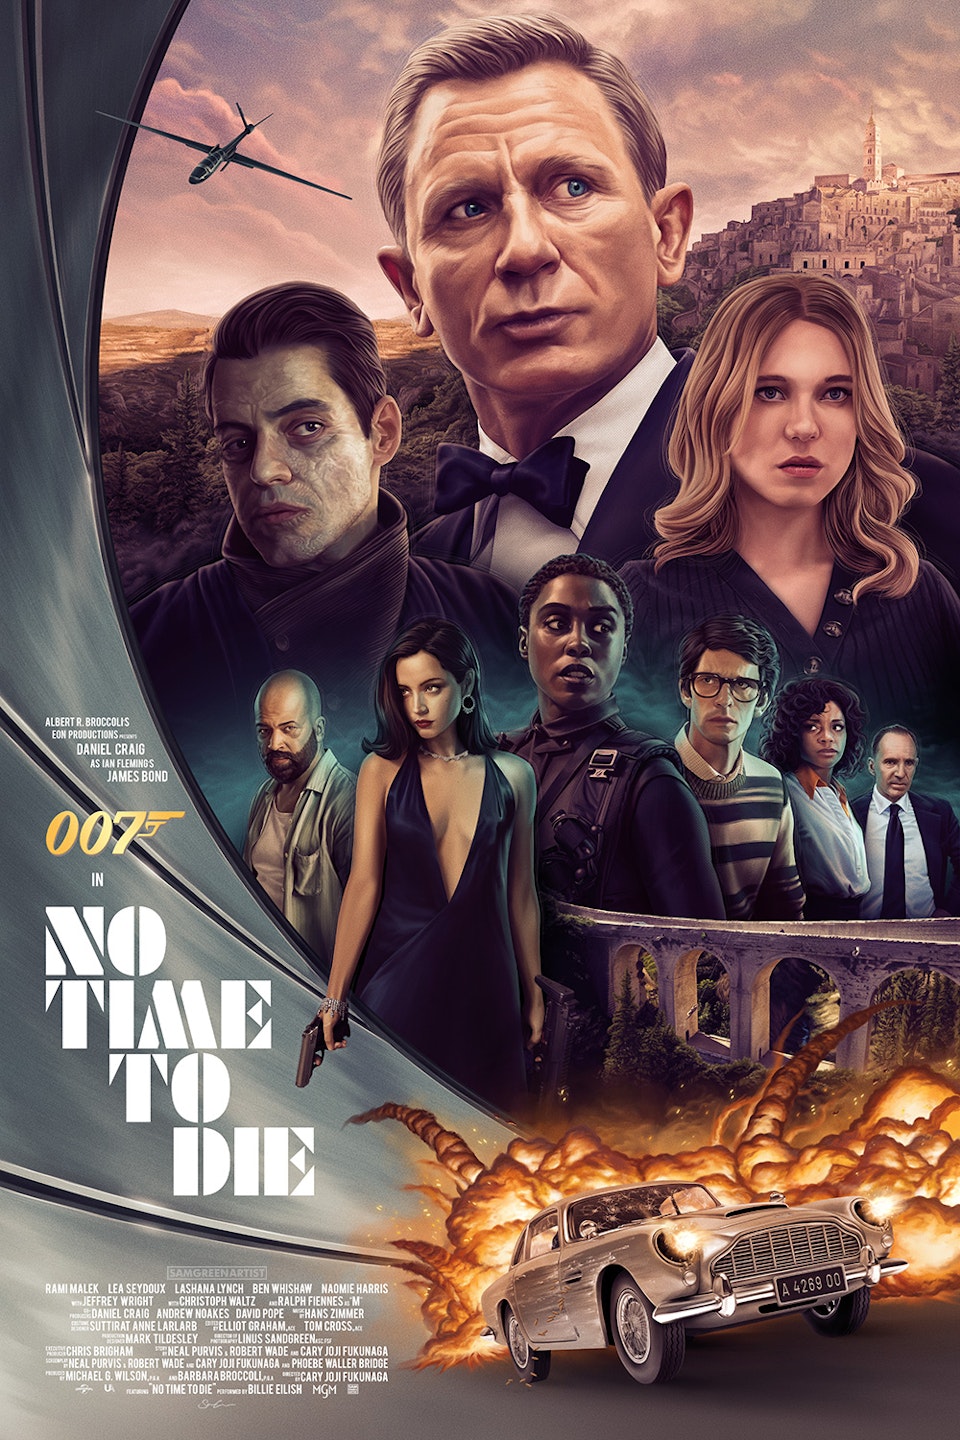 No Time To Die (Private Commission) - James Bond - No Time To Die poster illustration - Regular edition

This poster was a real labour of love, created with painstaking detail and my most ambitious poster to date. I've been a huge Bond fan since I was a kid and so it was important to create work that I felt did the legacy justice. I have really loved Craig's tenure in the role and thought No Time To Die was a bold and fitting end to this era of 007.

Painted in Procreate, title and design in Adobe Illustrator, assembly in Adobe Photoshop.